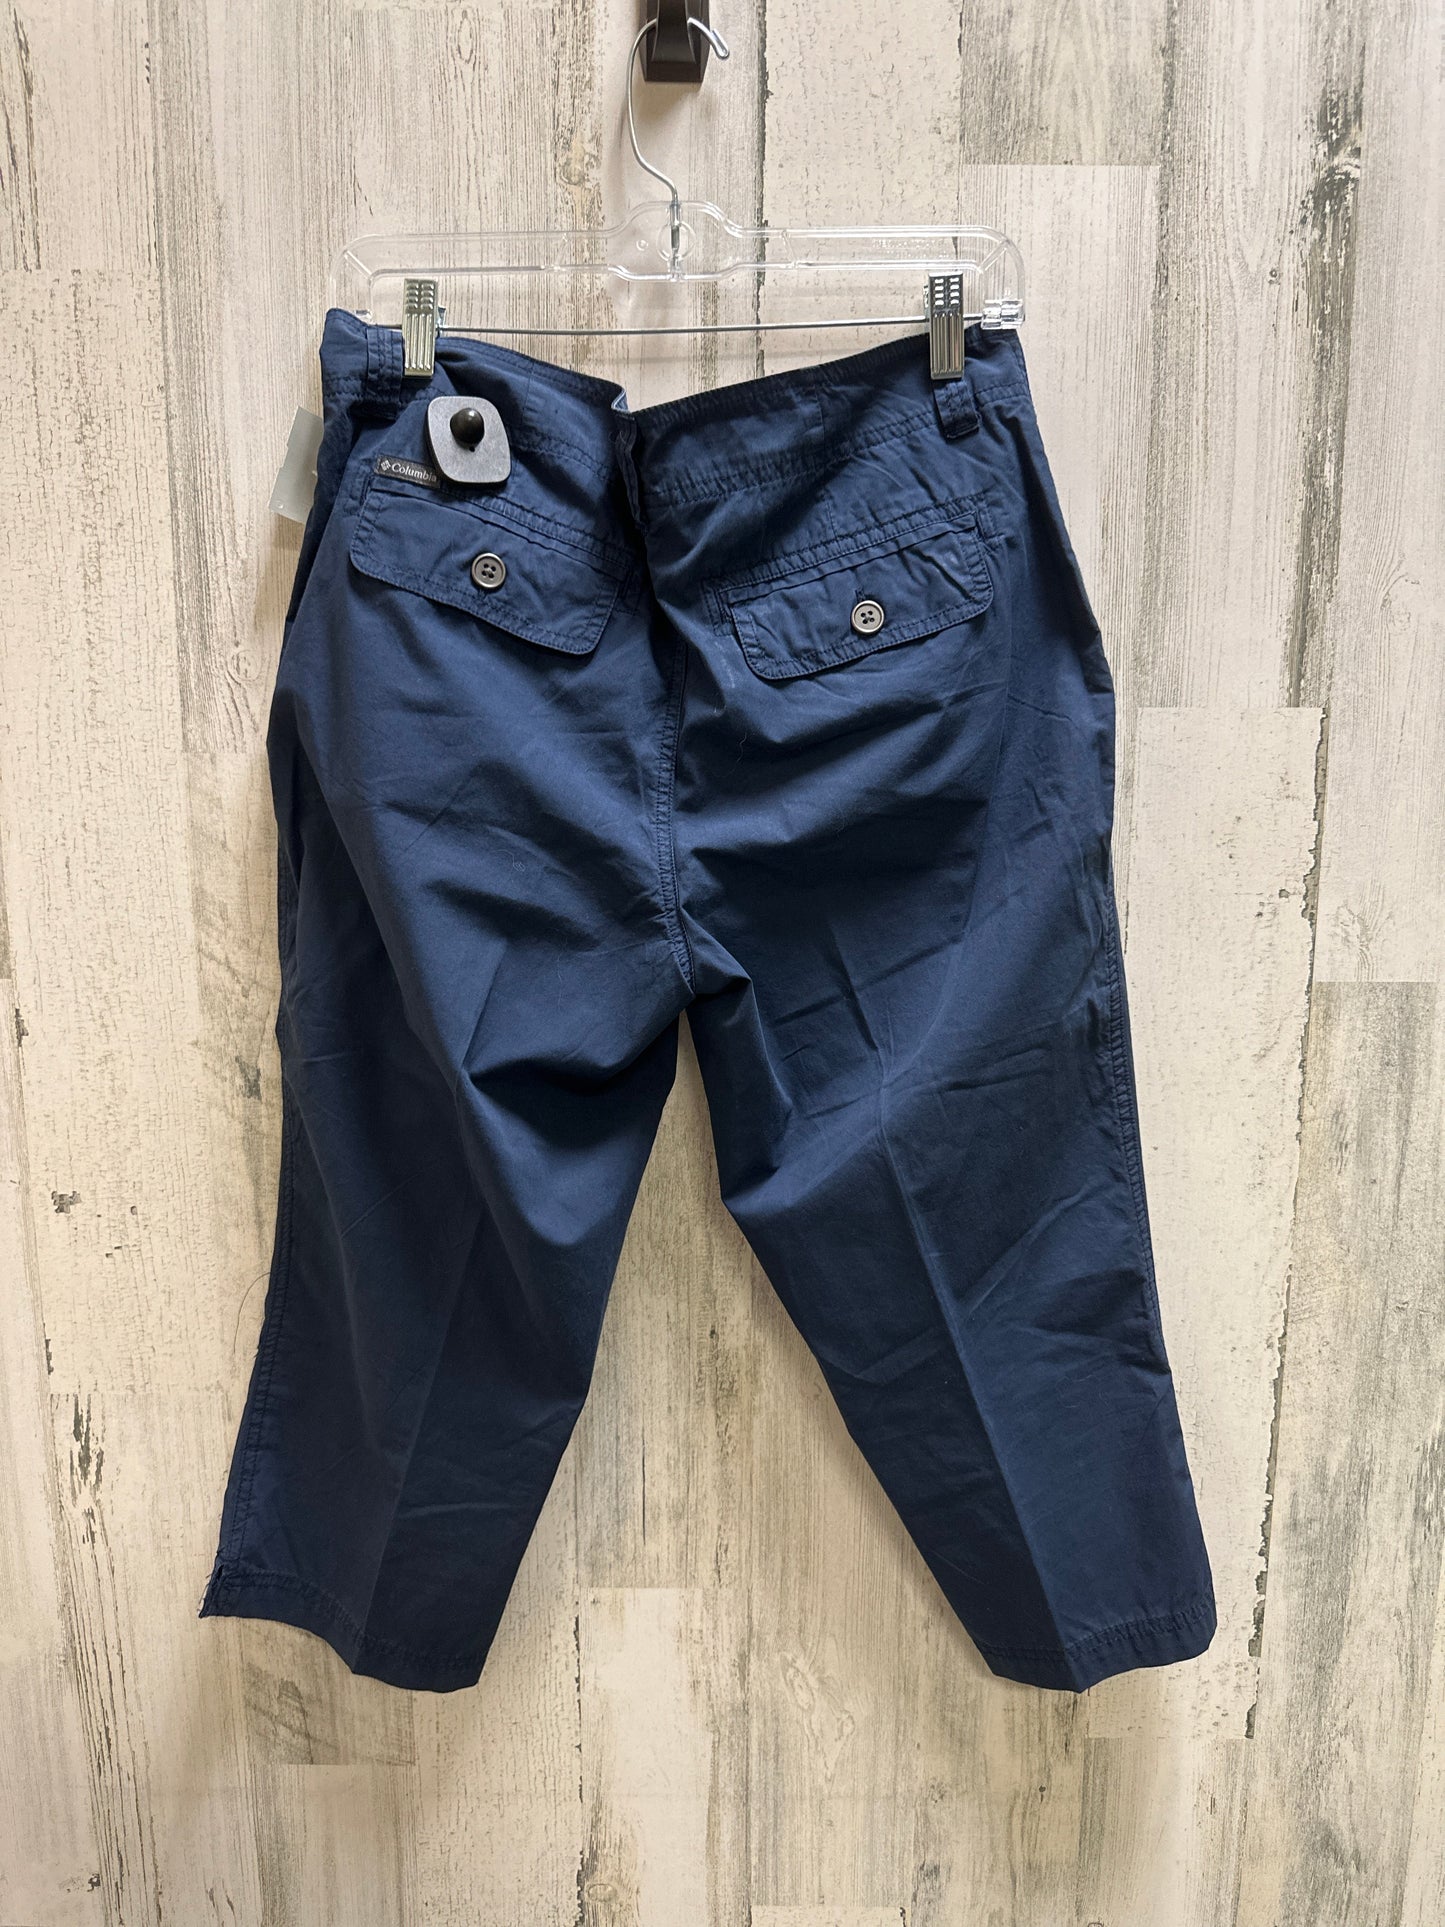 Capris By Columbia  Size: 10